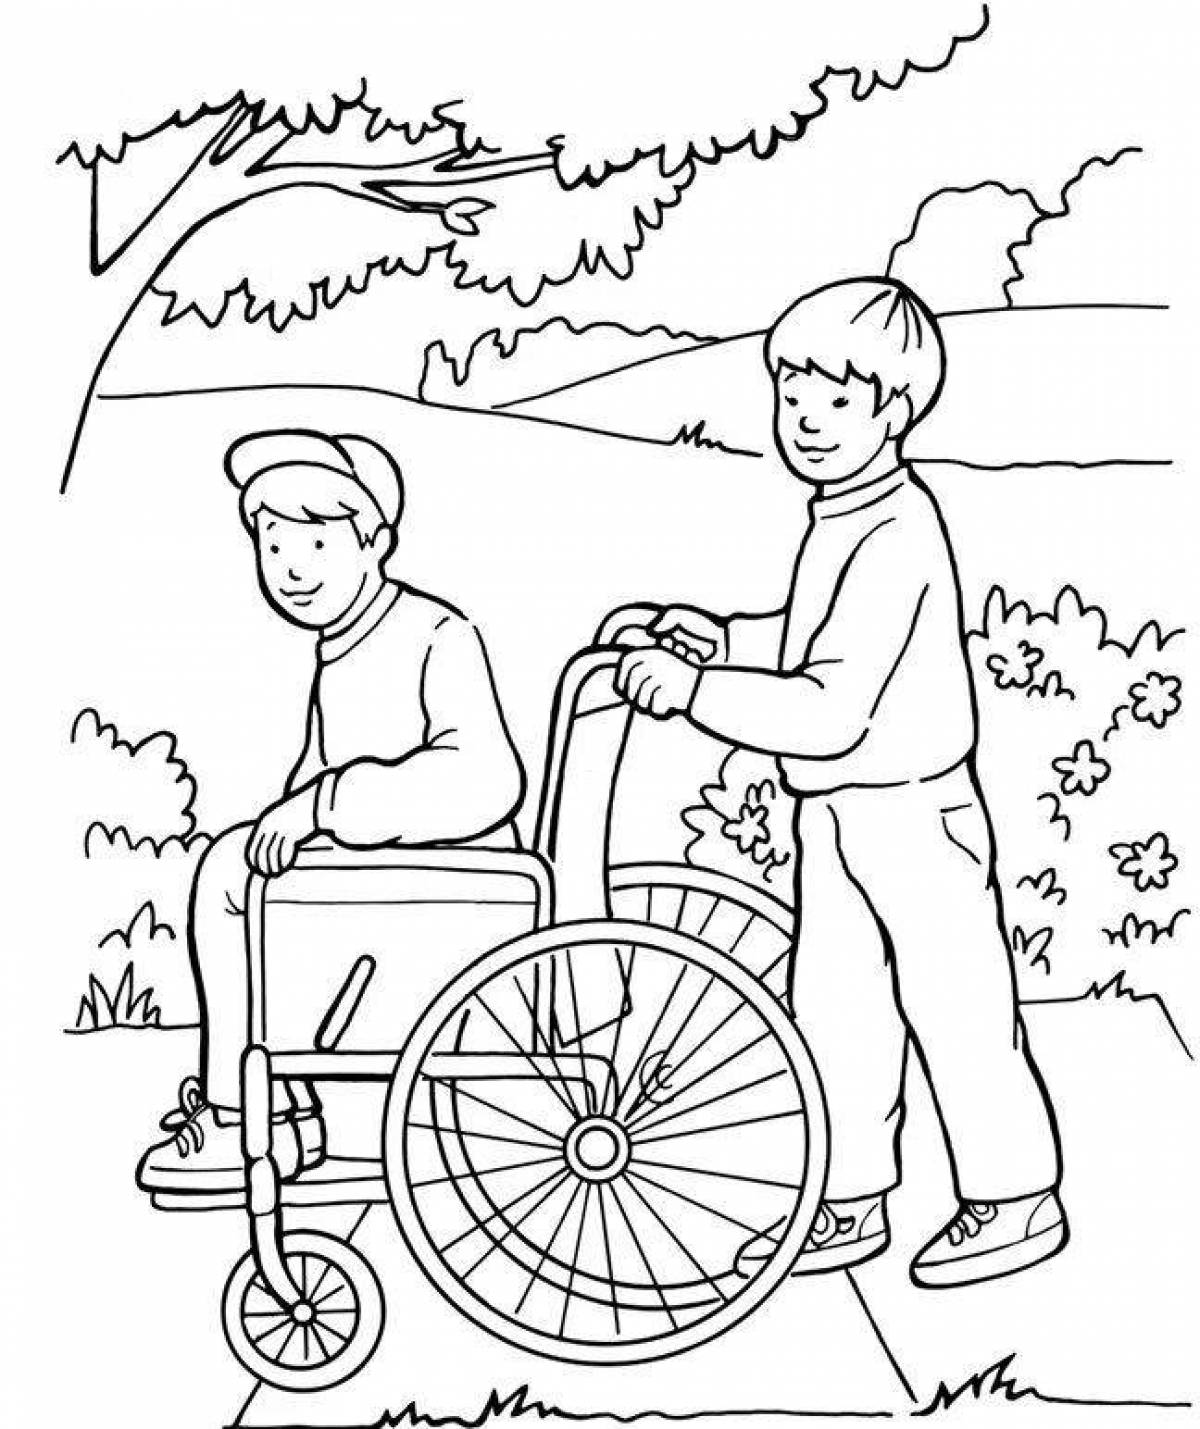 Coloring page sweet good deeds